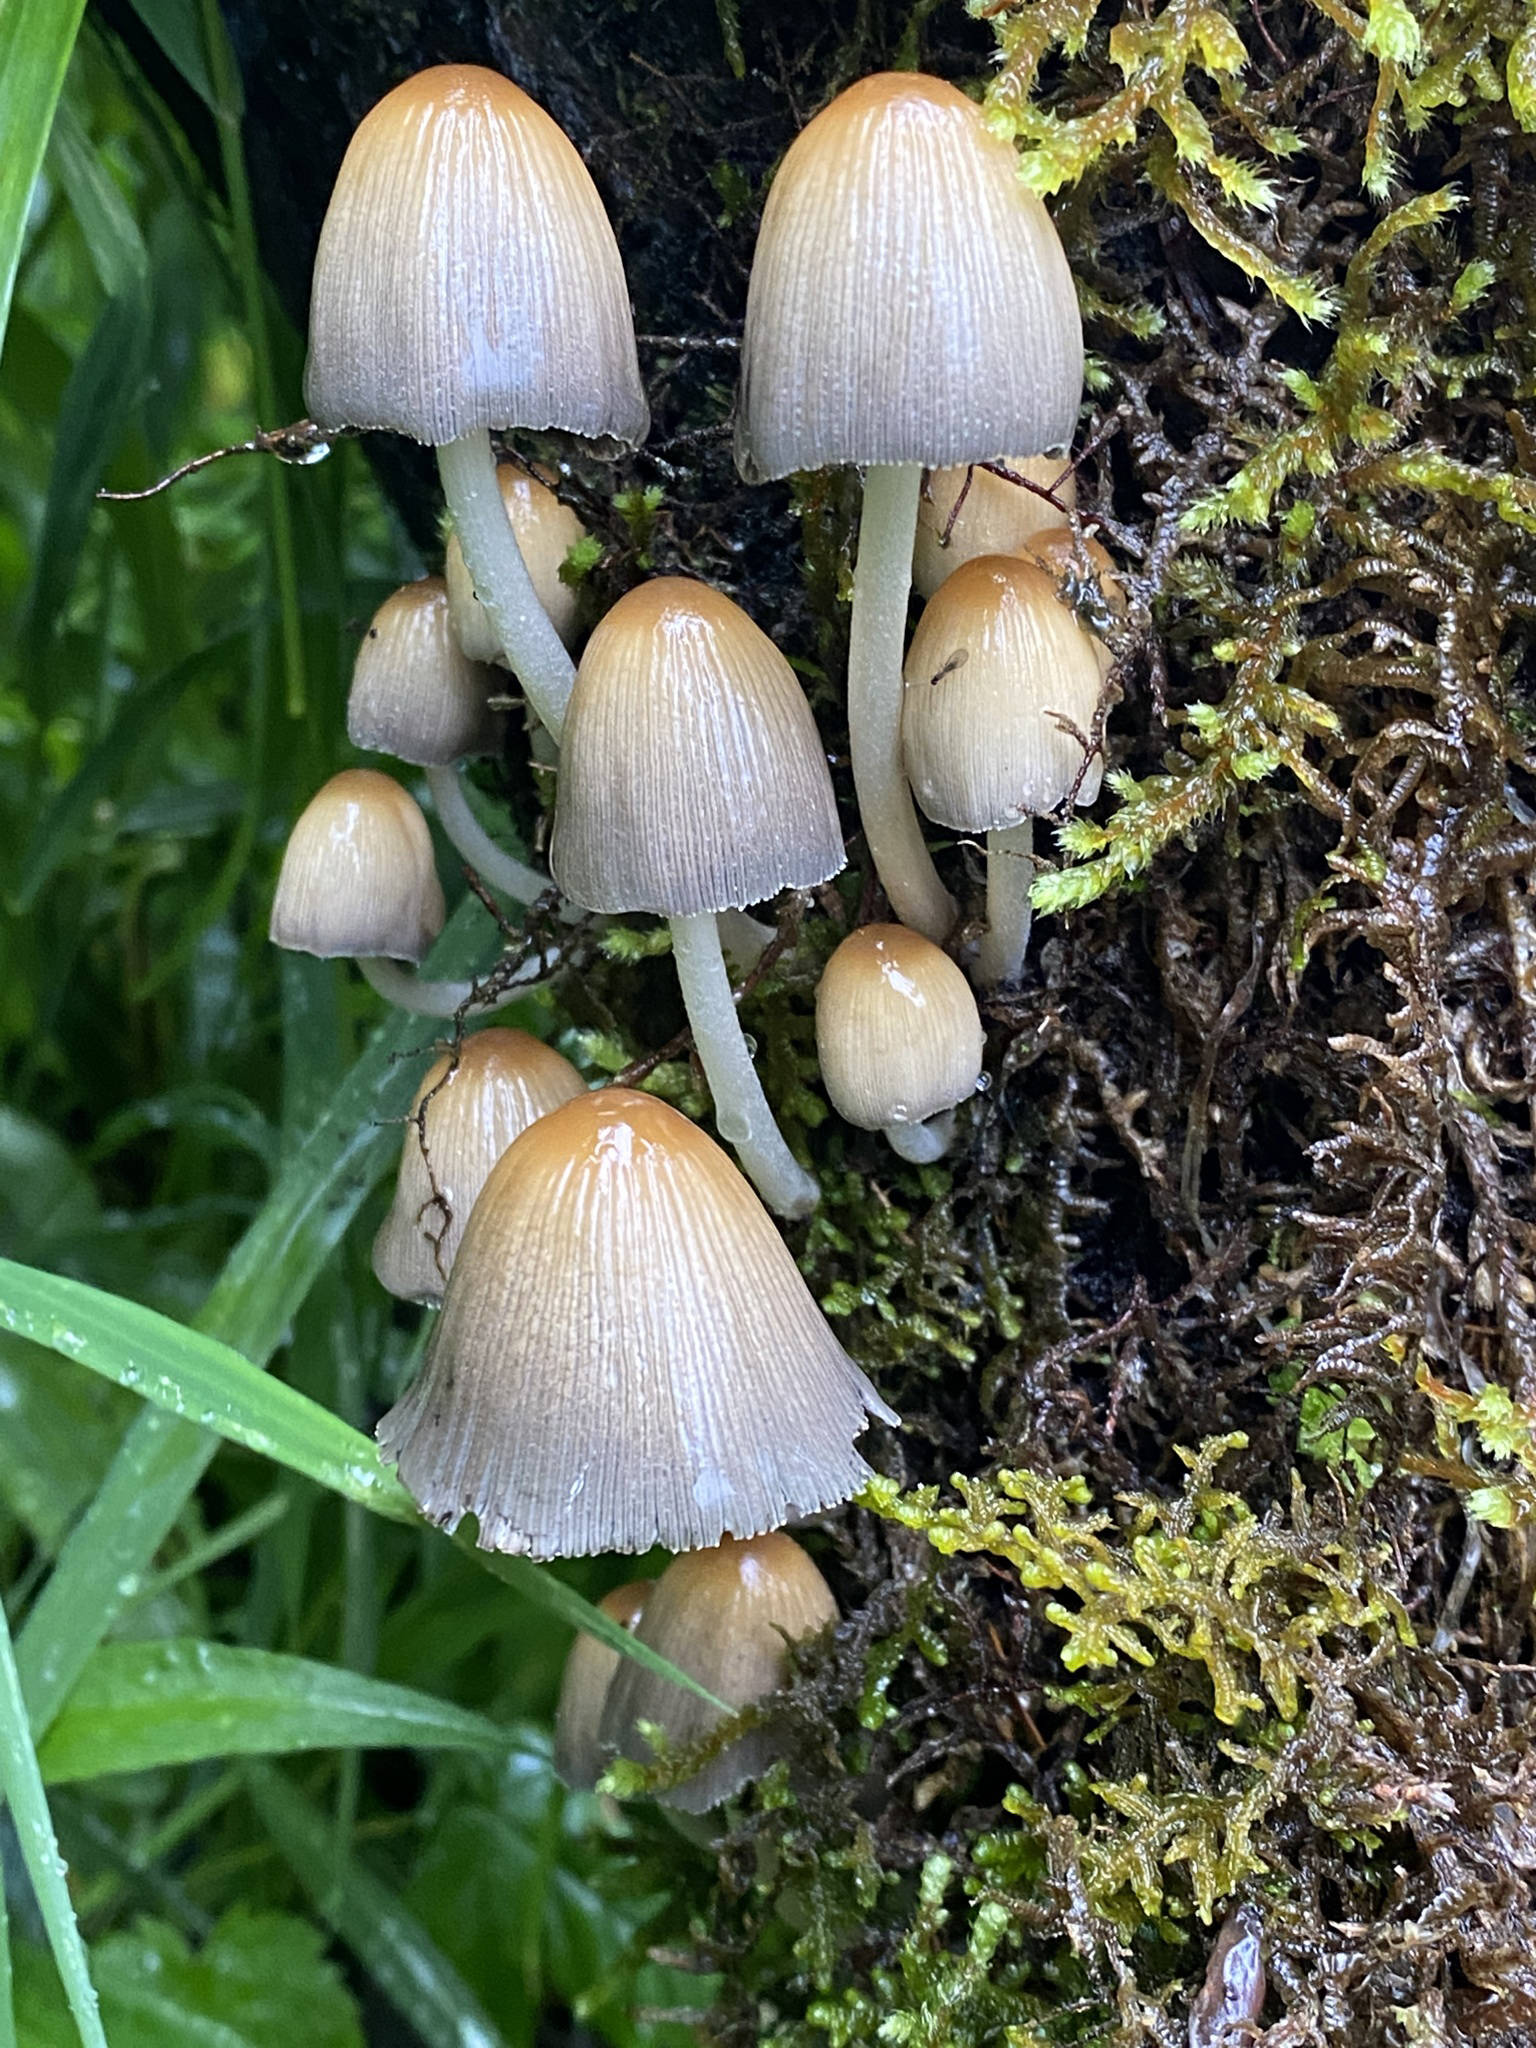 Mushrooms were seen during a July 25 hike along Perseverance Trail. (Courtesy Photo / Deana Barajas)                                Mushrooms were seen during a July 25 hike along Perseverance Trail. (Courtesy Photo / Deana Barajas)